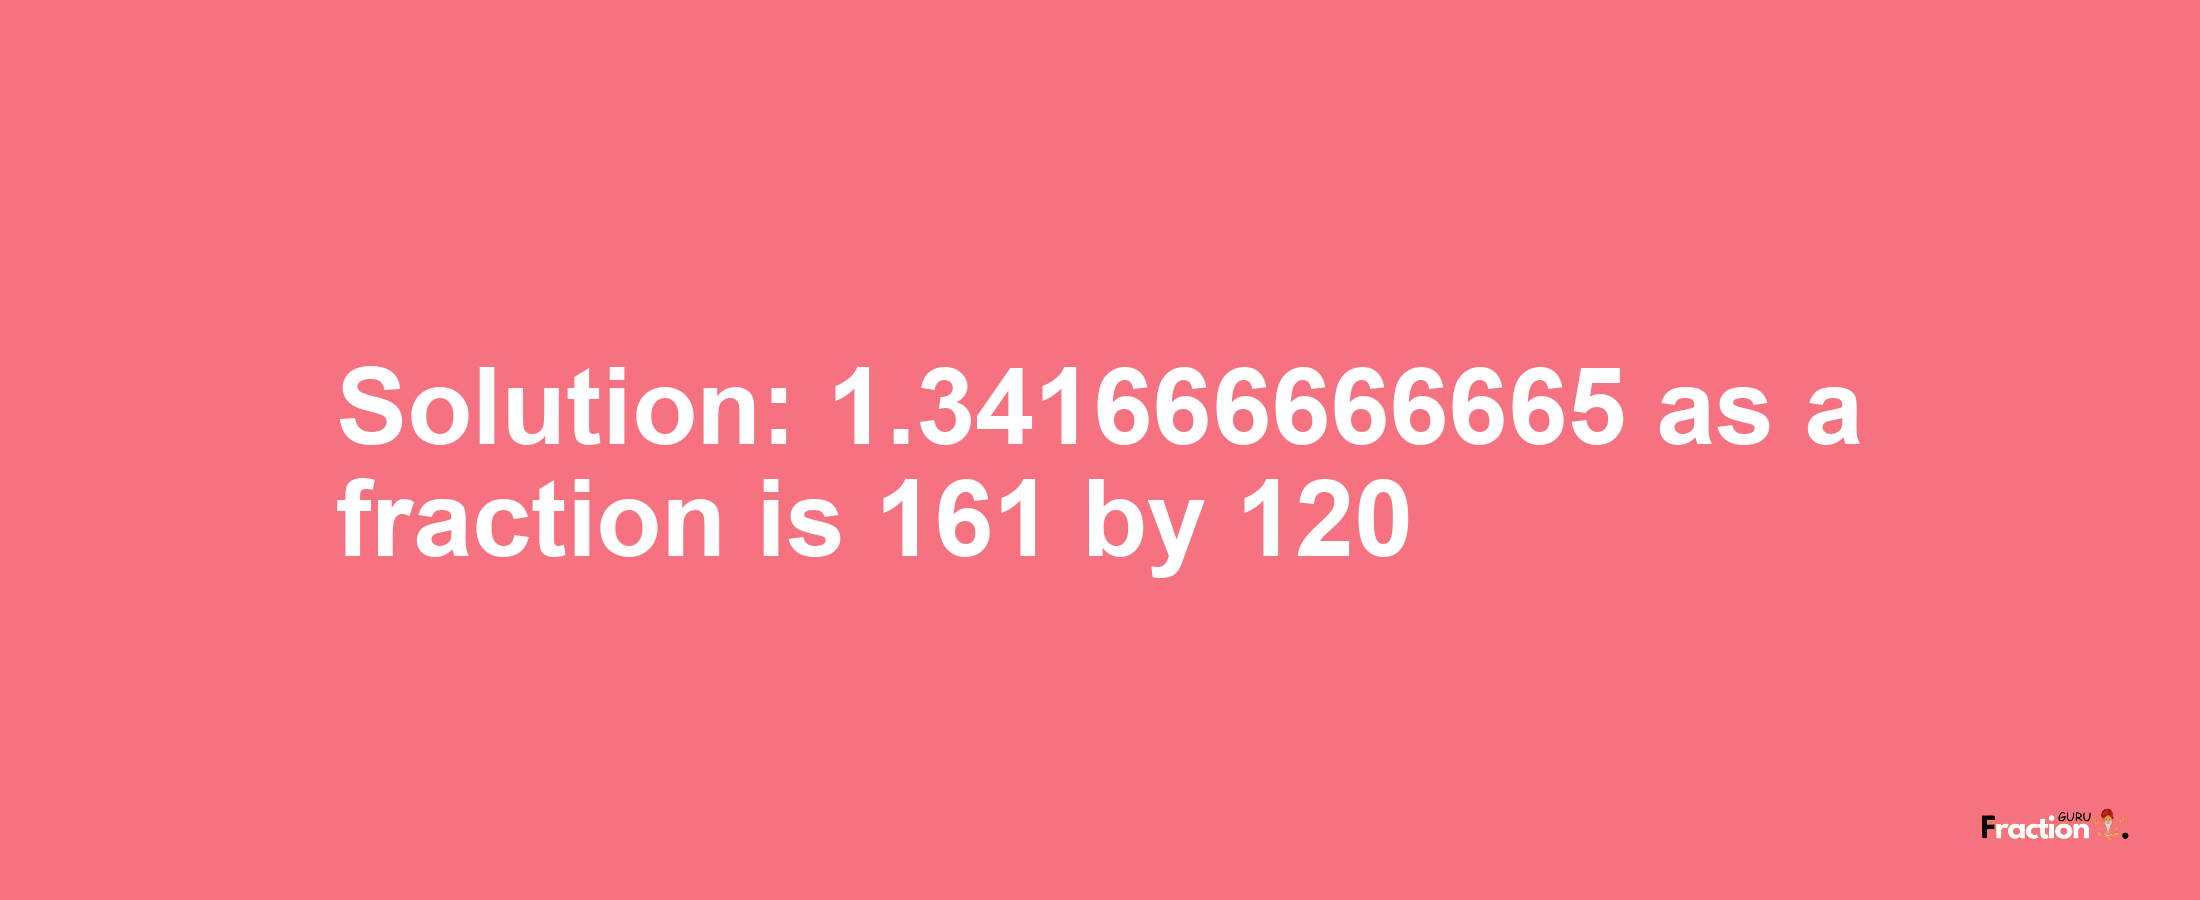 Solution:1.341666666665 as a fraction is 161/120